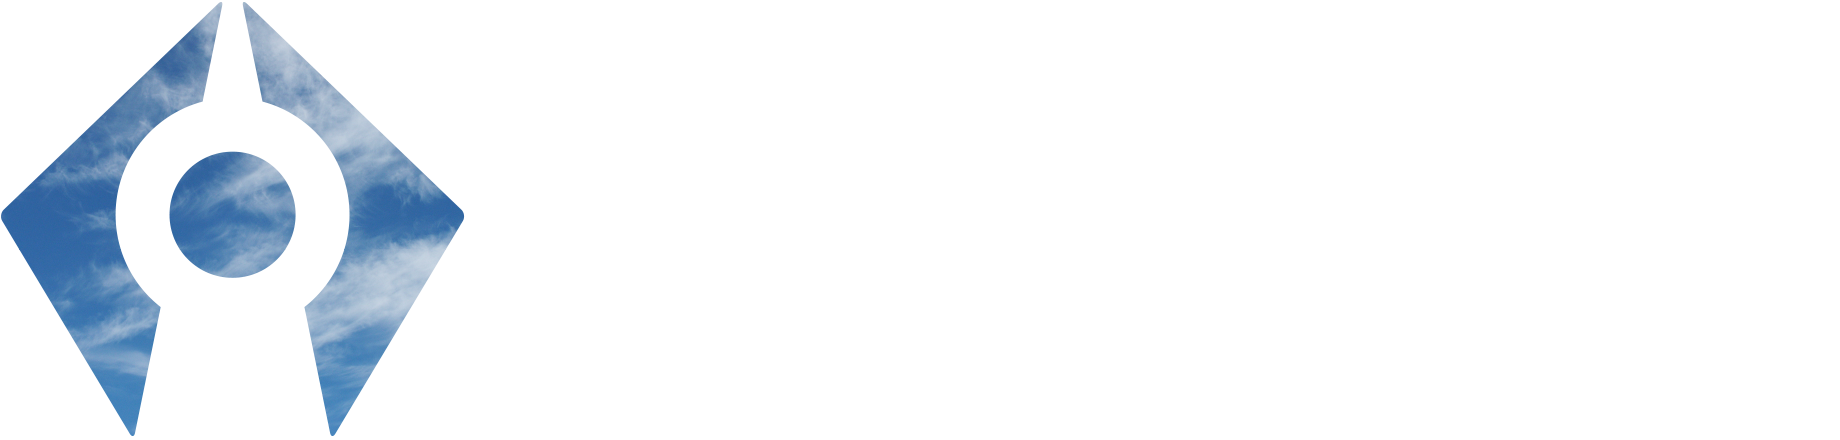 empowered-products-oil-logo